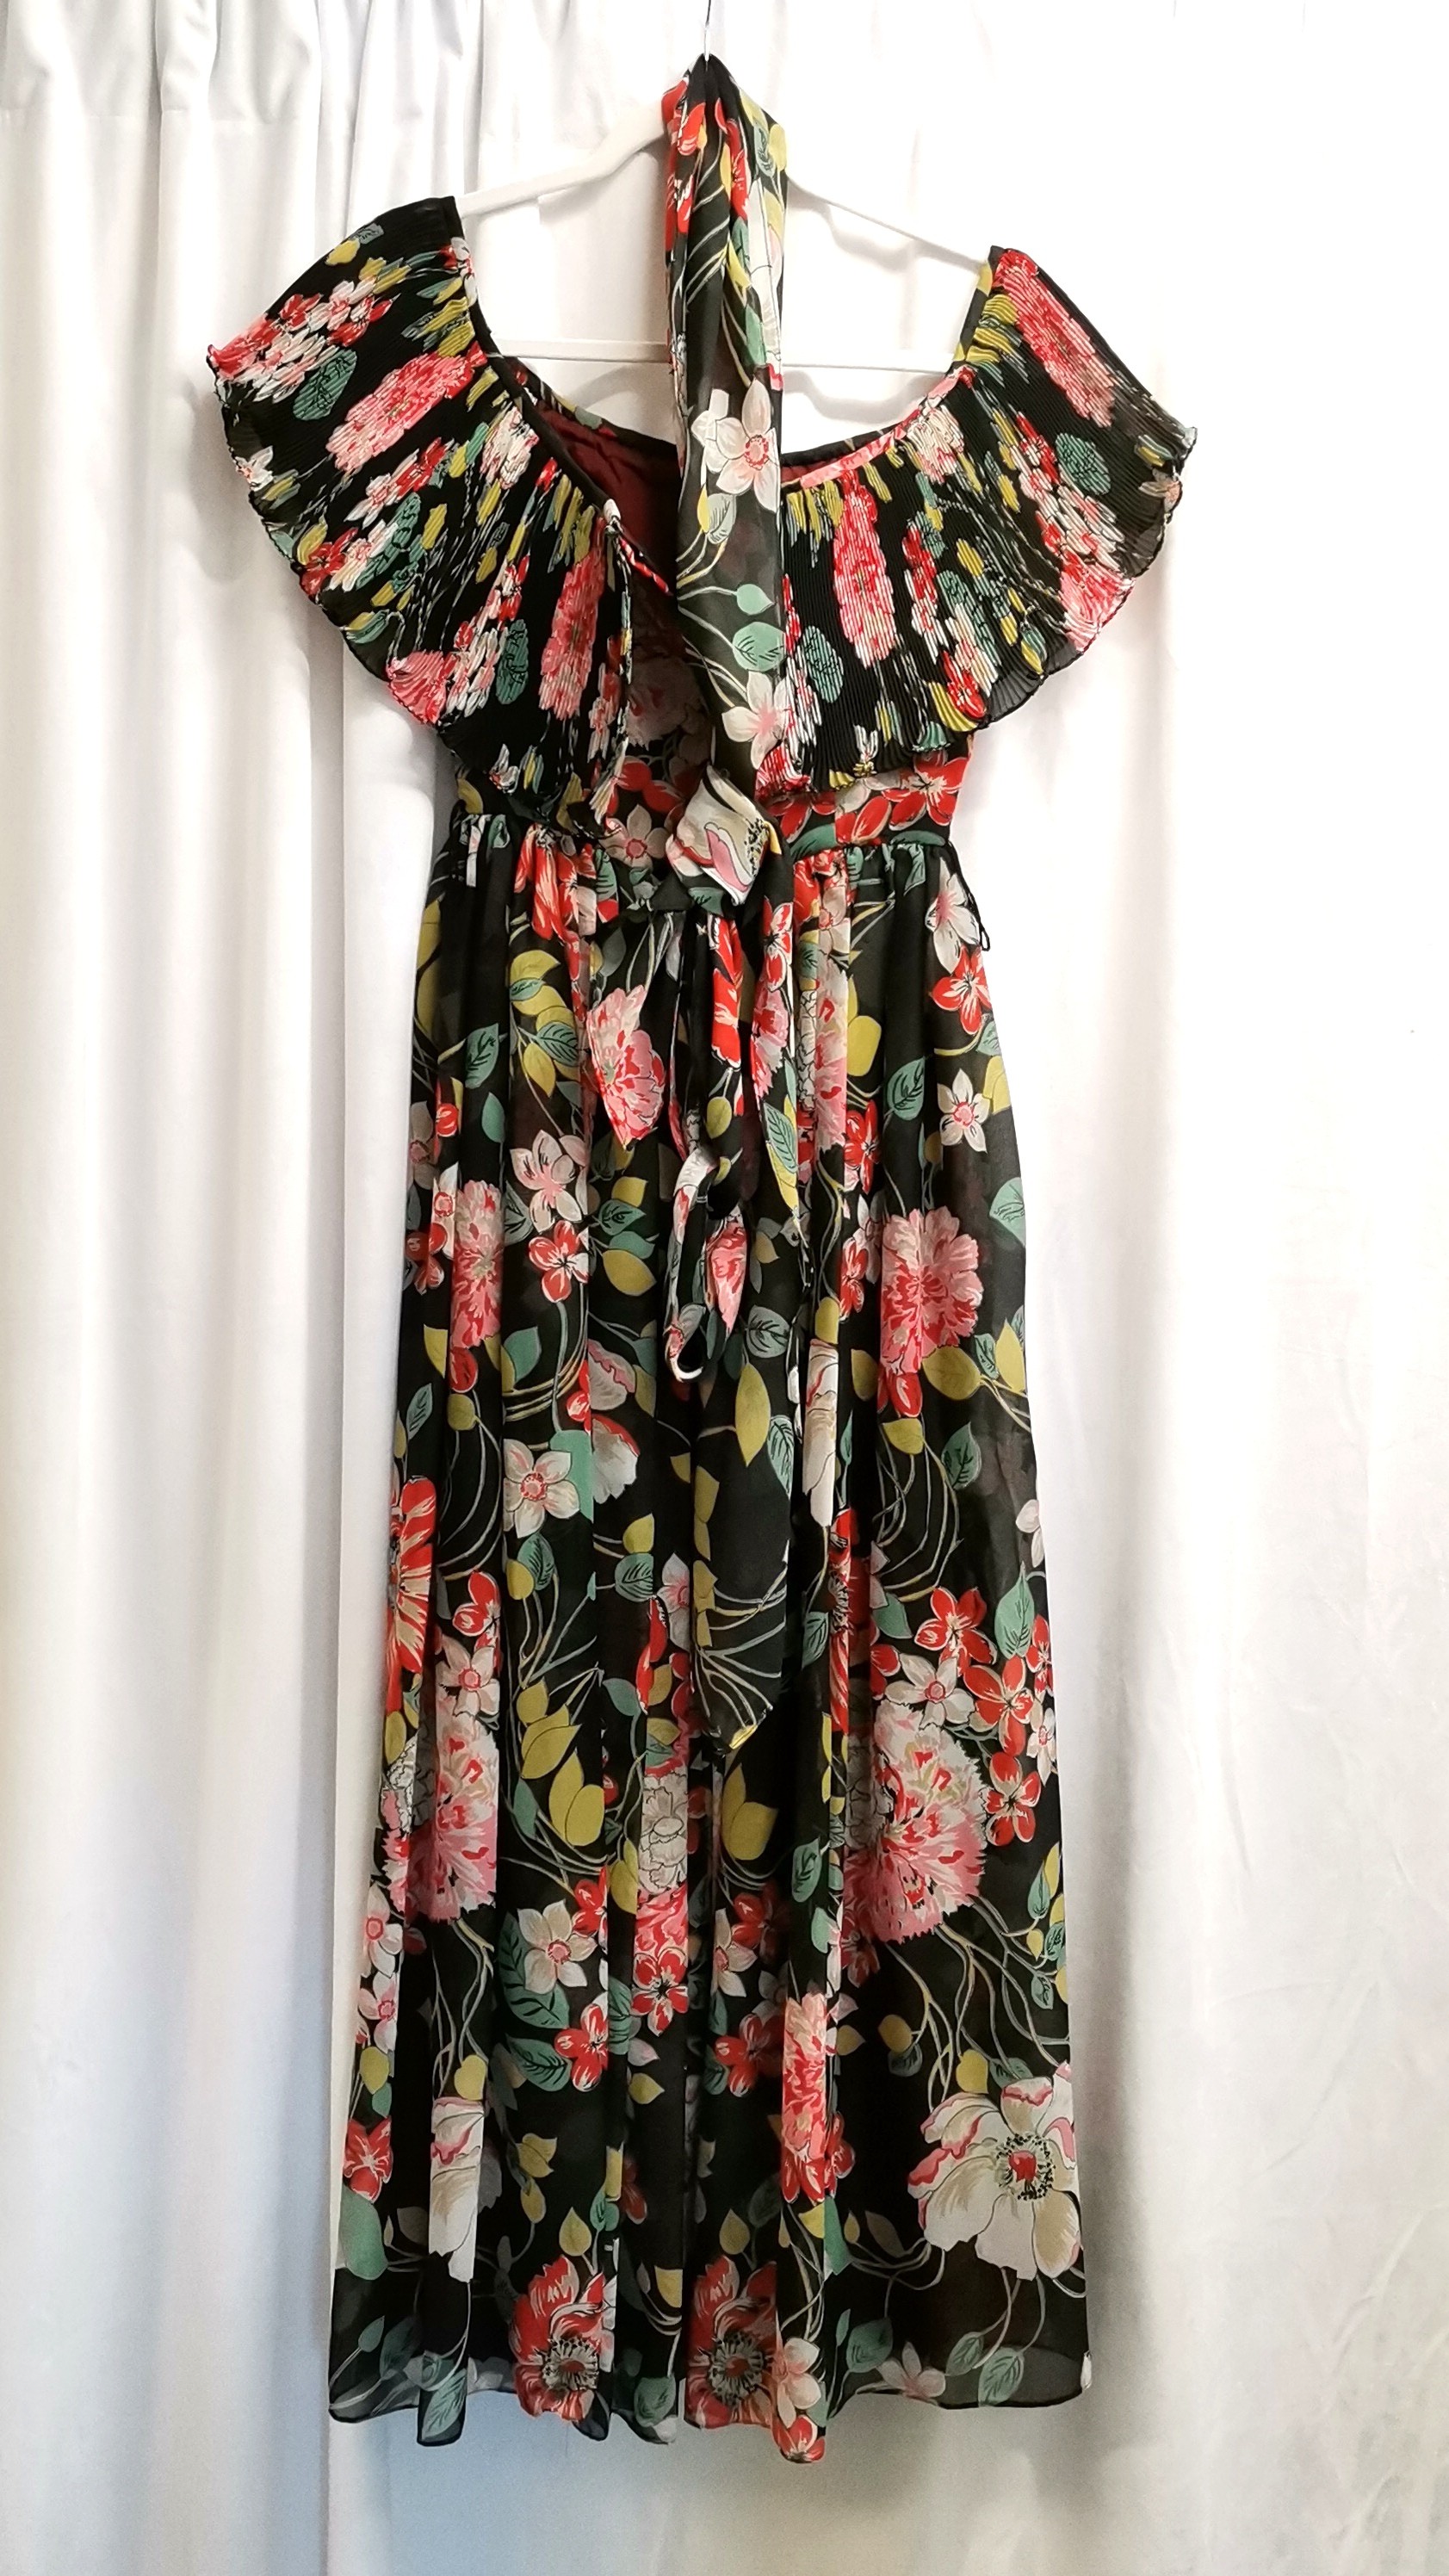 1970's Jean Varon chiffon floral dress with tie belt & large pleated collar - chest 72cm